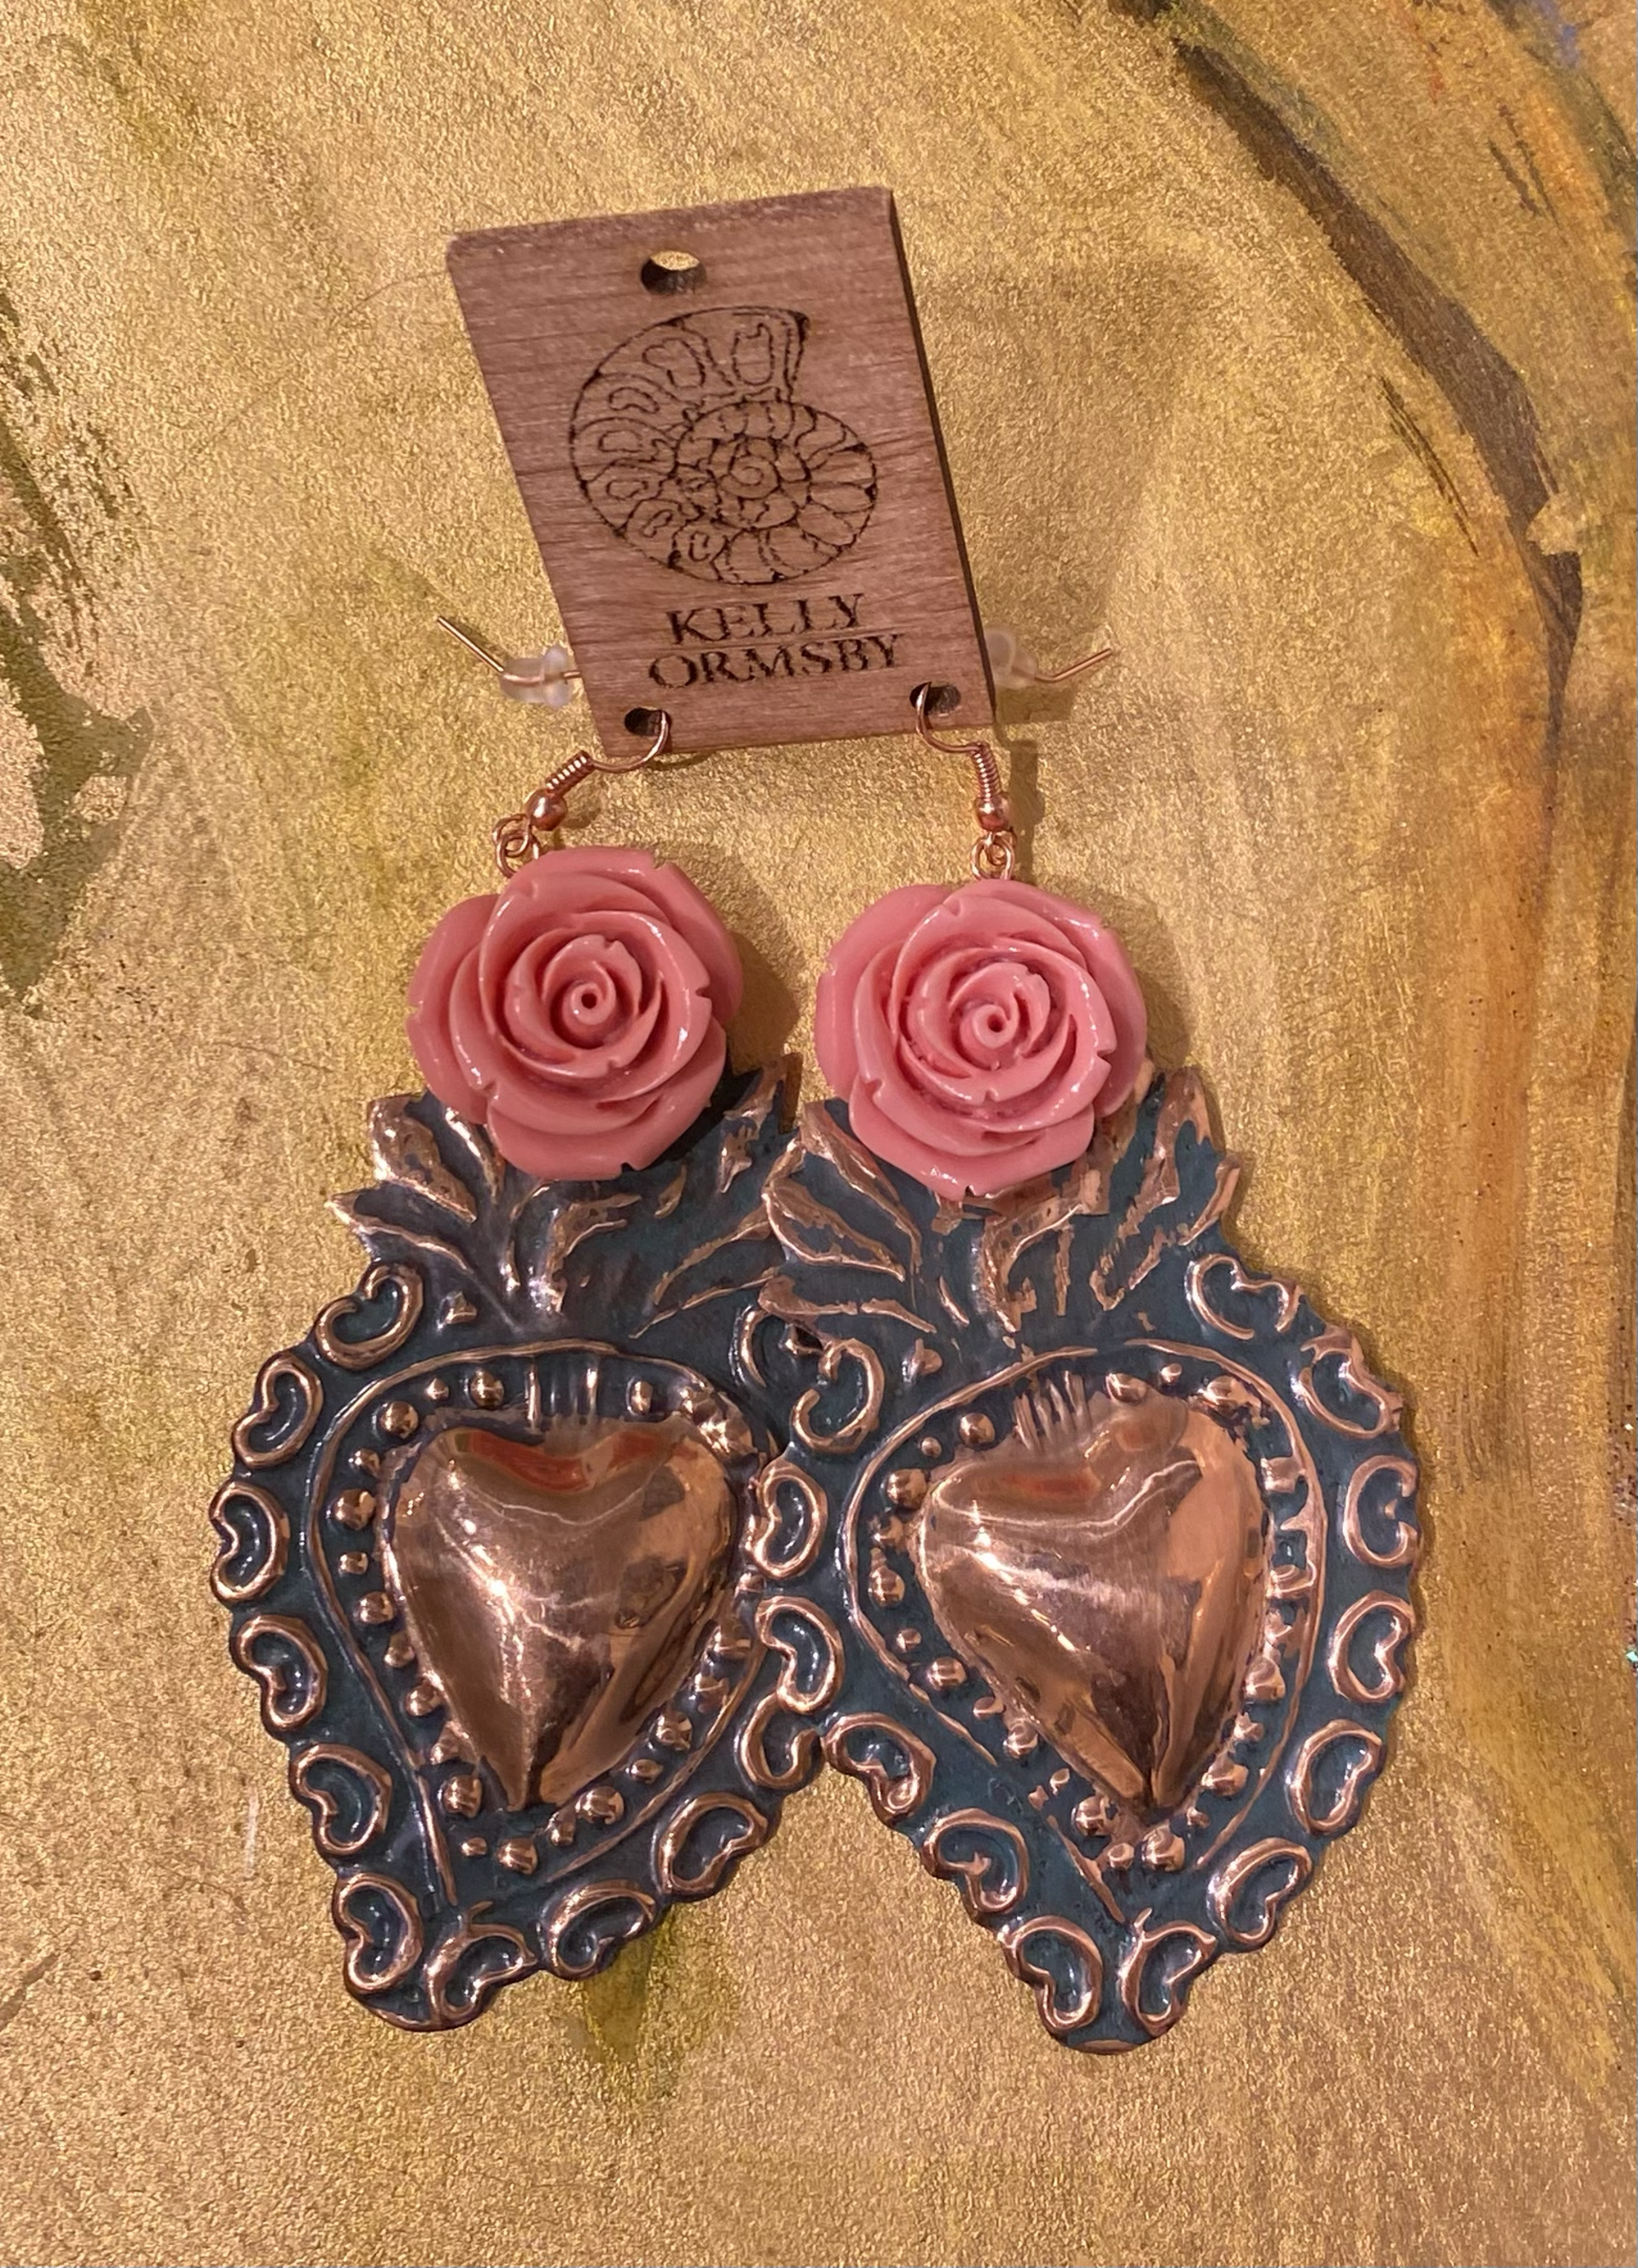 K722 Sacred Heart Earrings with Pink Roses by Kelly Ormsby